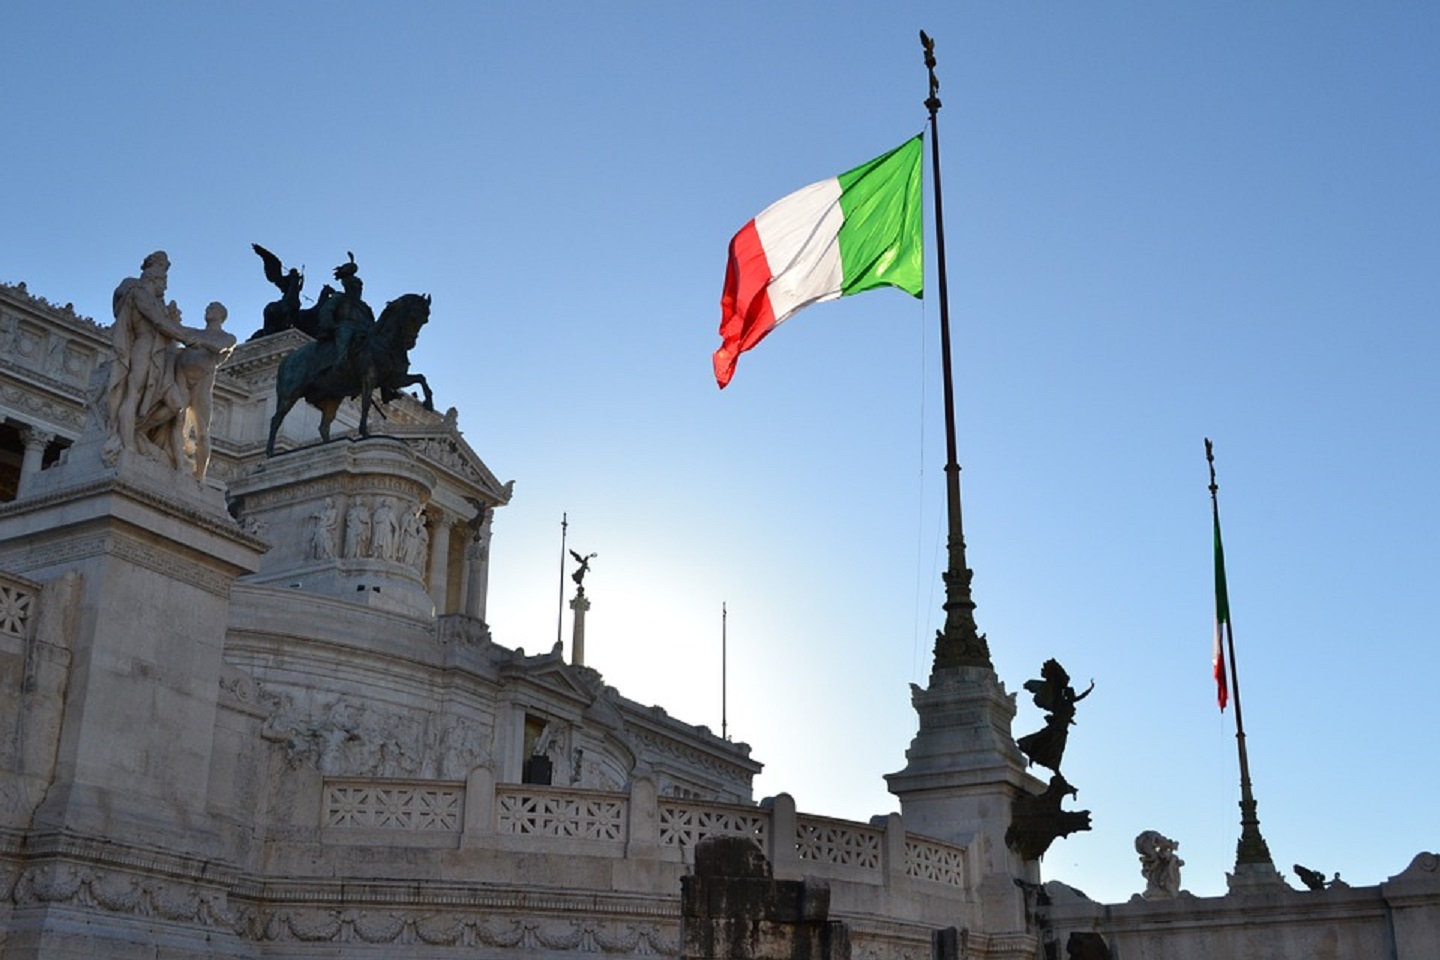 Flag of Italy - "Altar of the Fatherland"